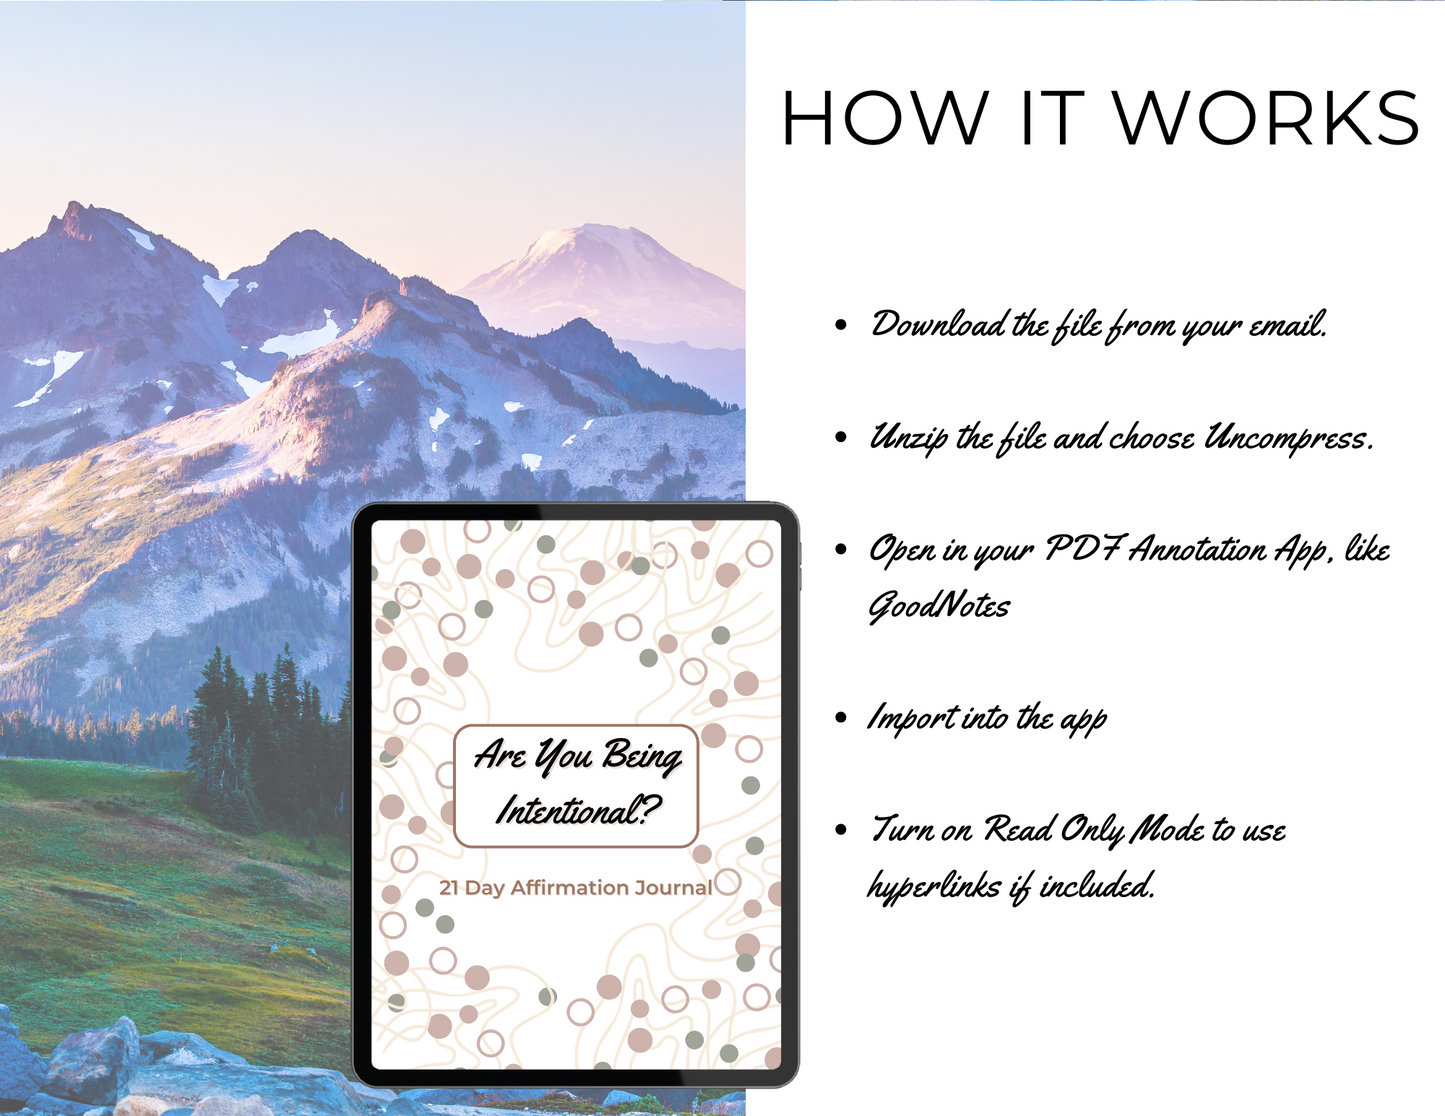 Are You Being Intentional? 21 Day Affirmation Journal